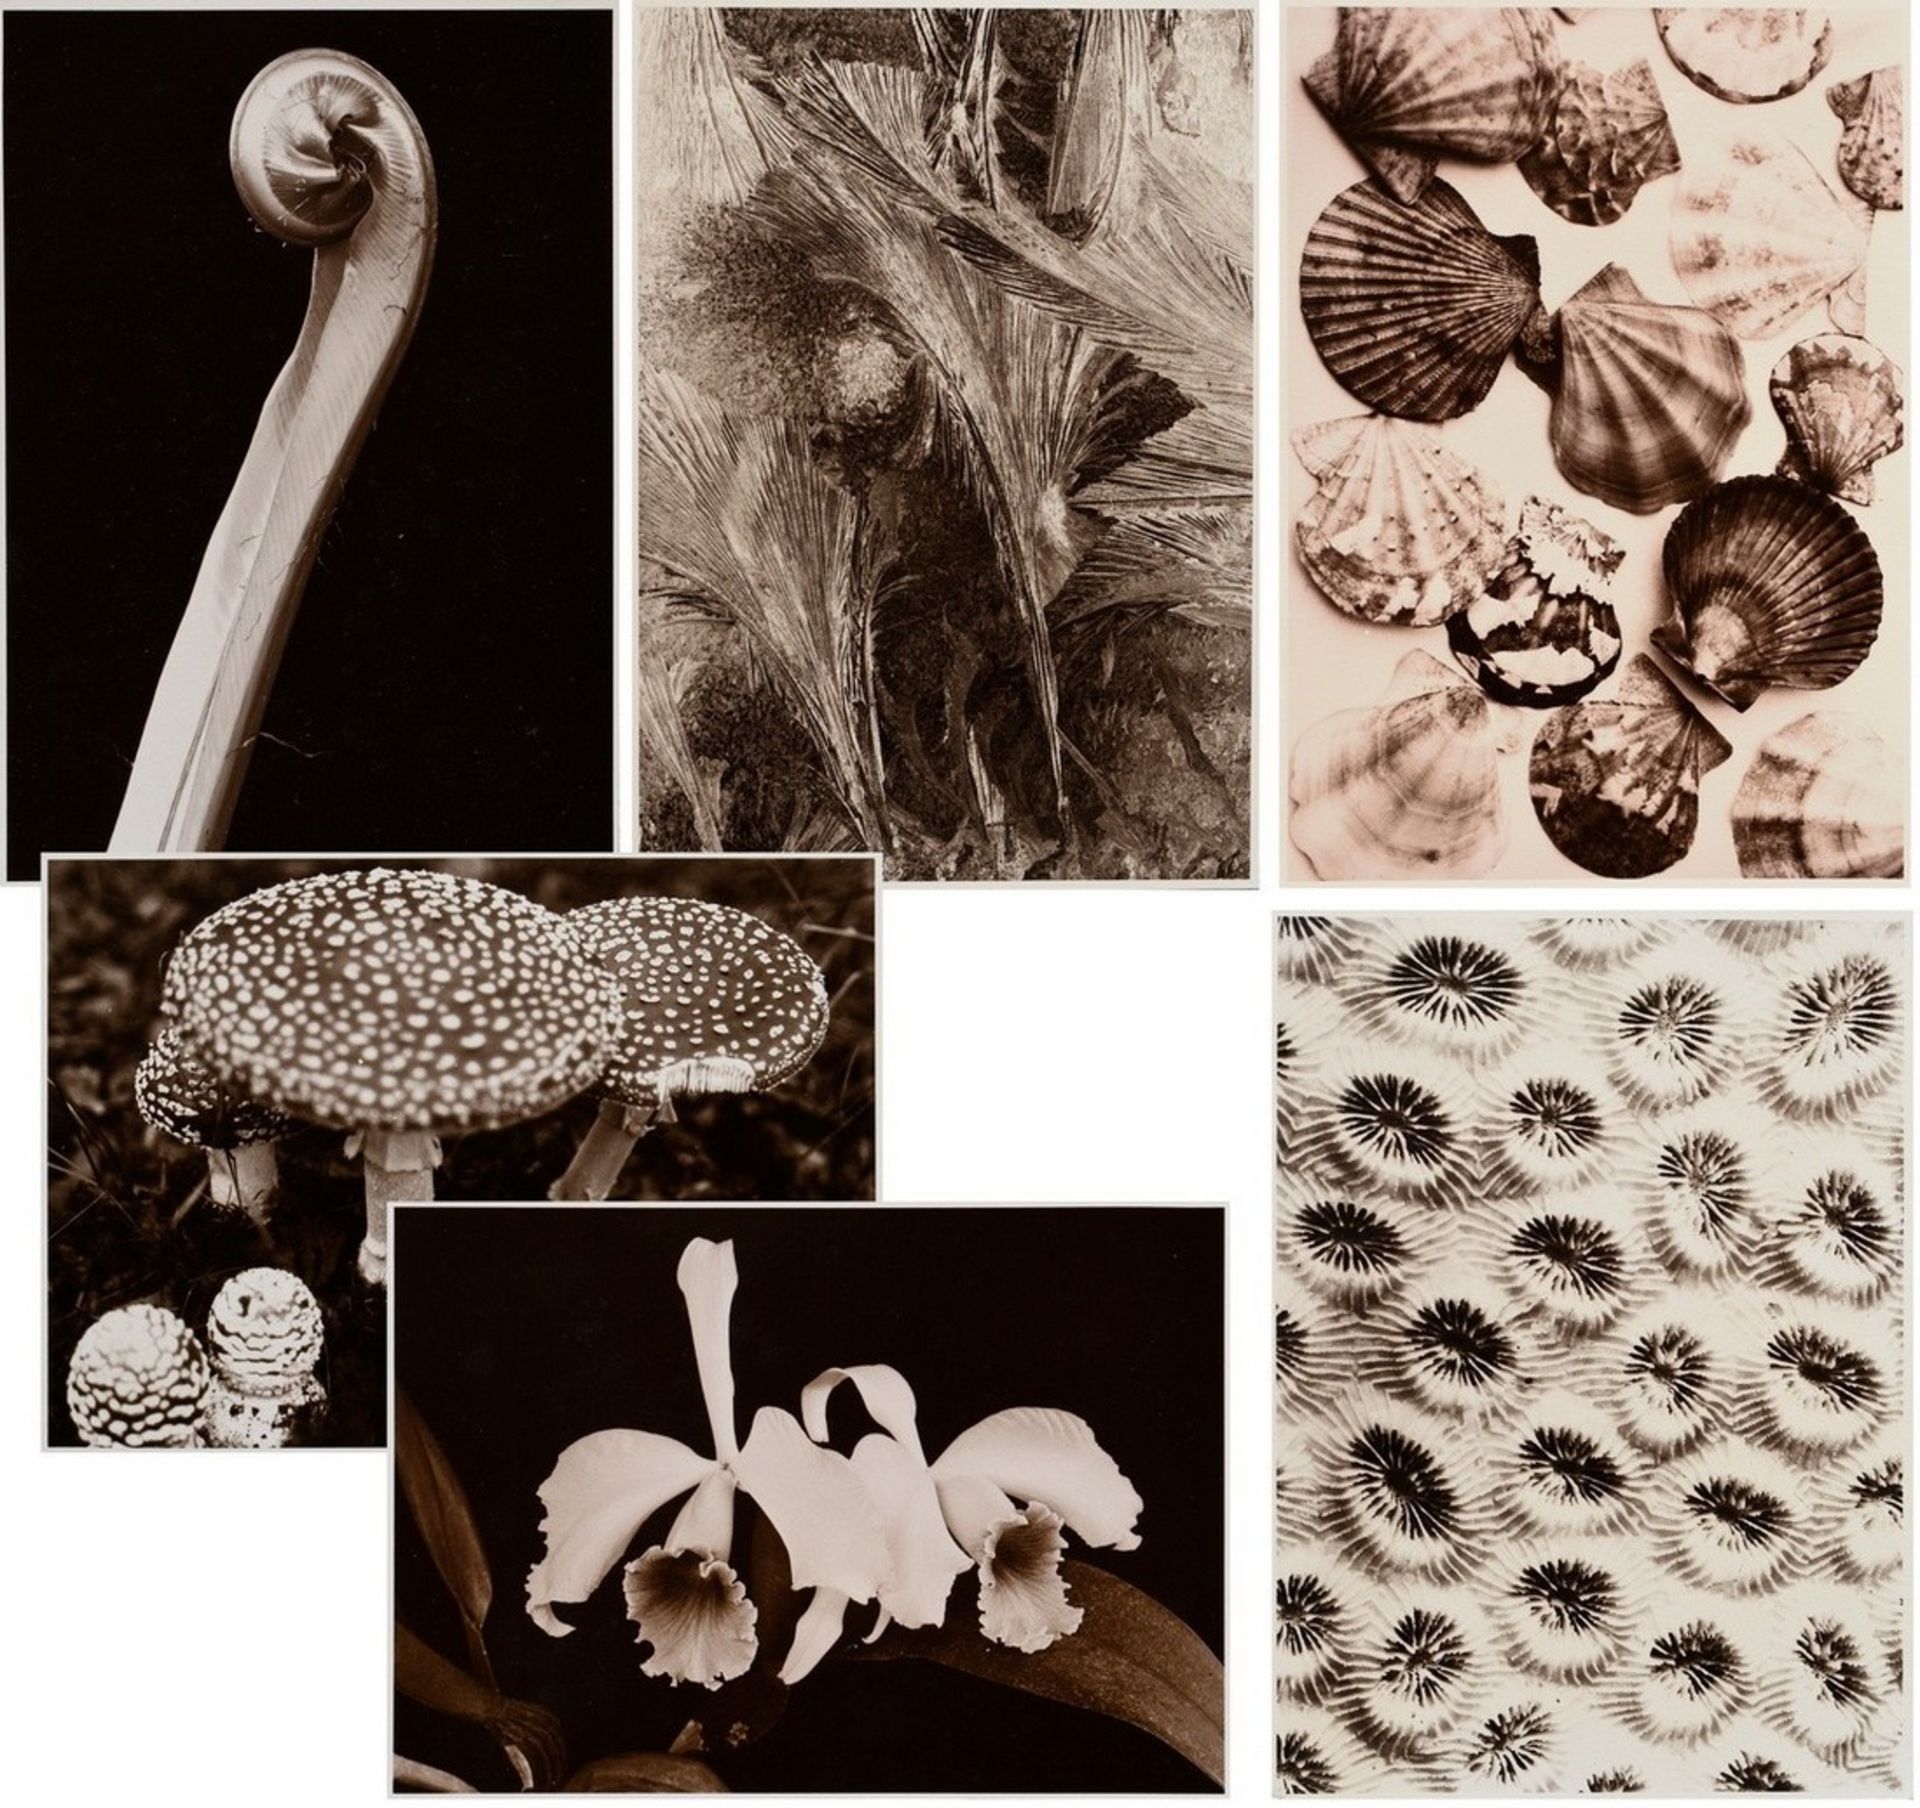 6 Koch, Fred (1904-1947) "Ice Crystals, Mushrooms, Animals", photographs mounted on cardboard, insc